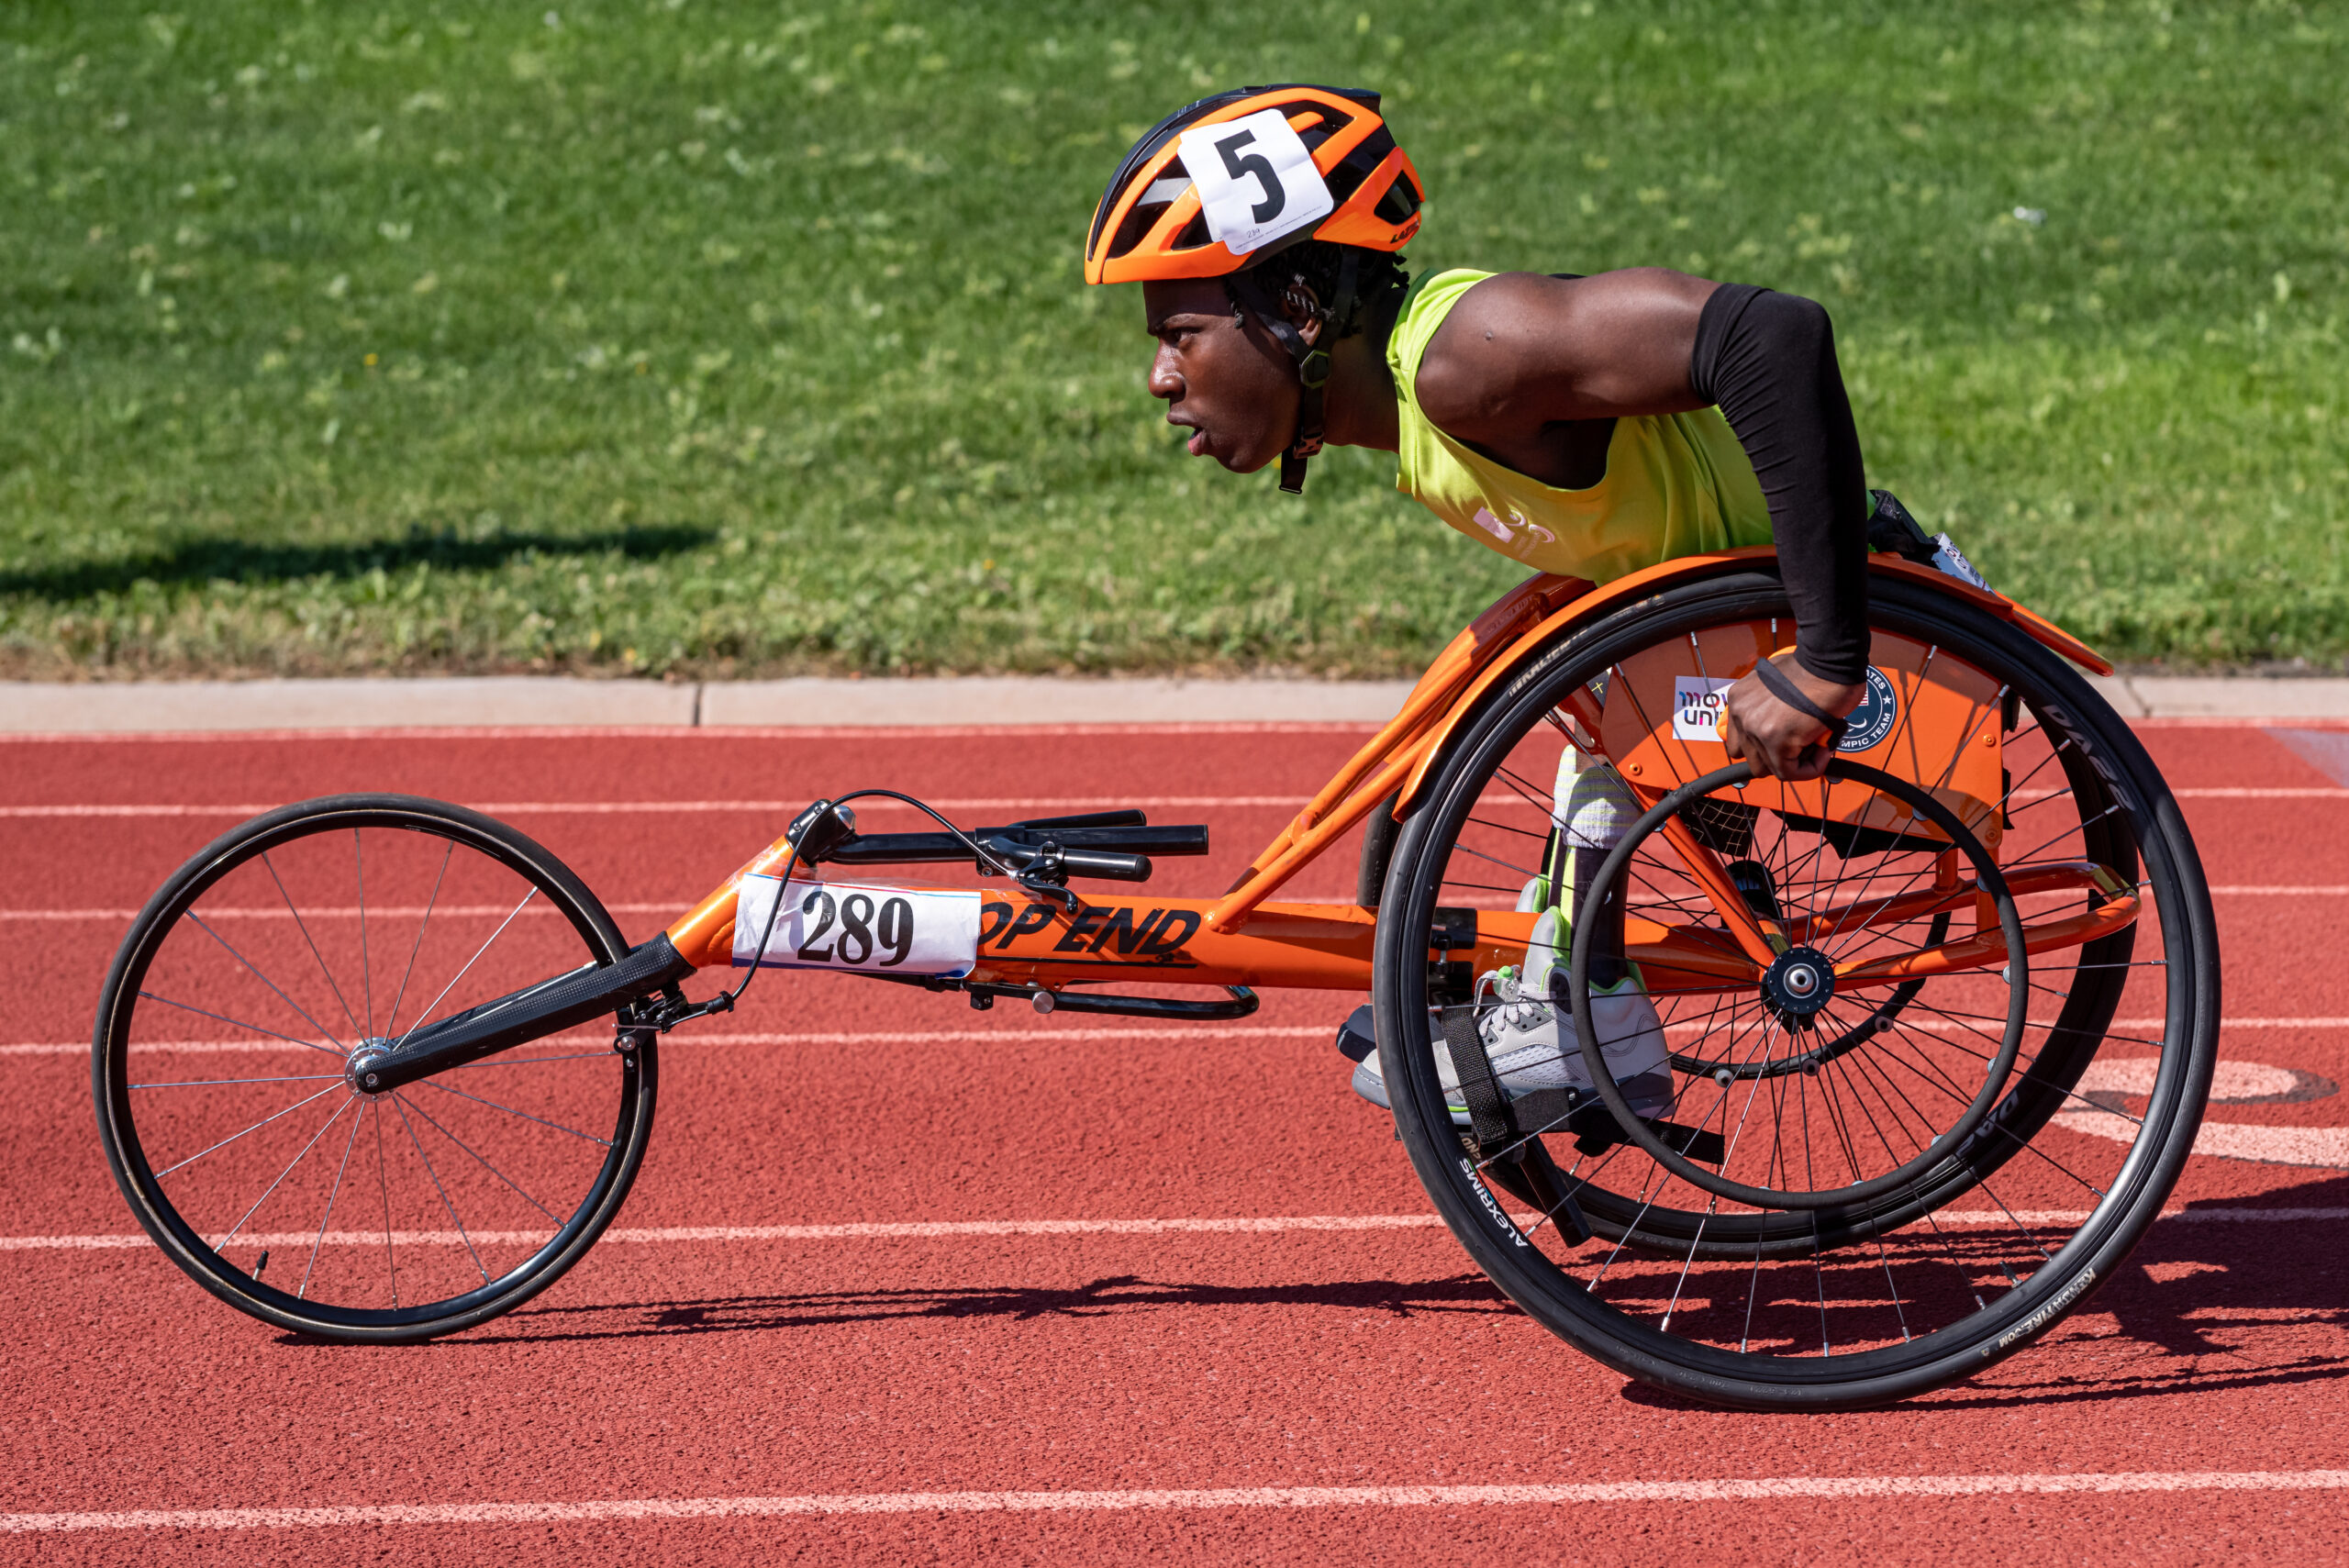 The Hartford Nationals to host hundreds of adaptive athletes in Hoover